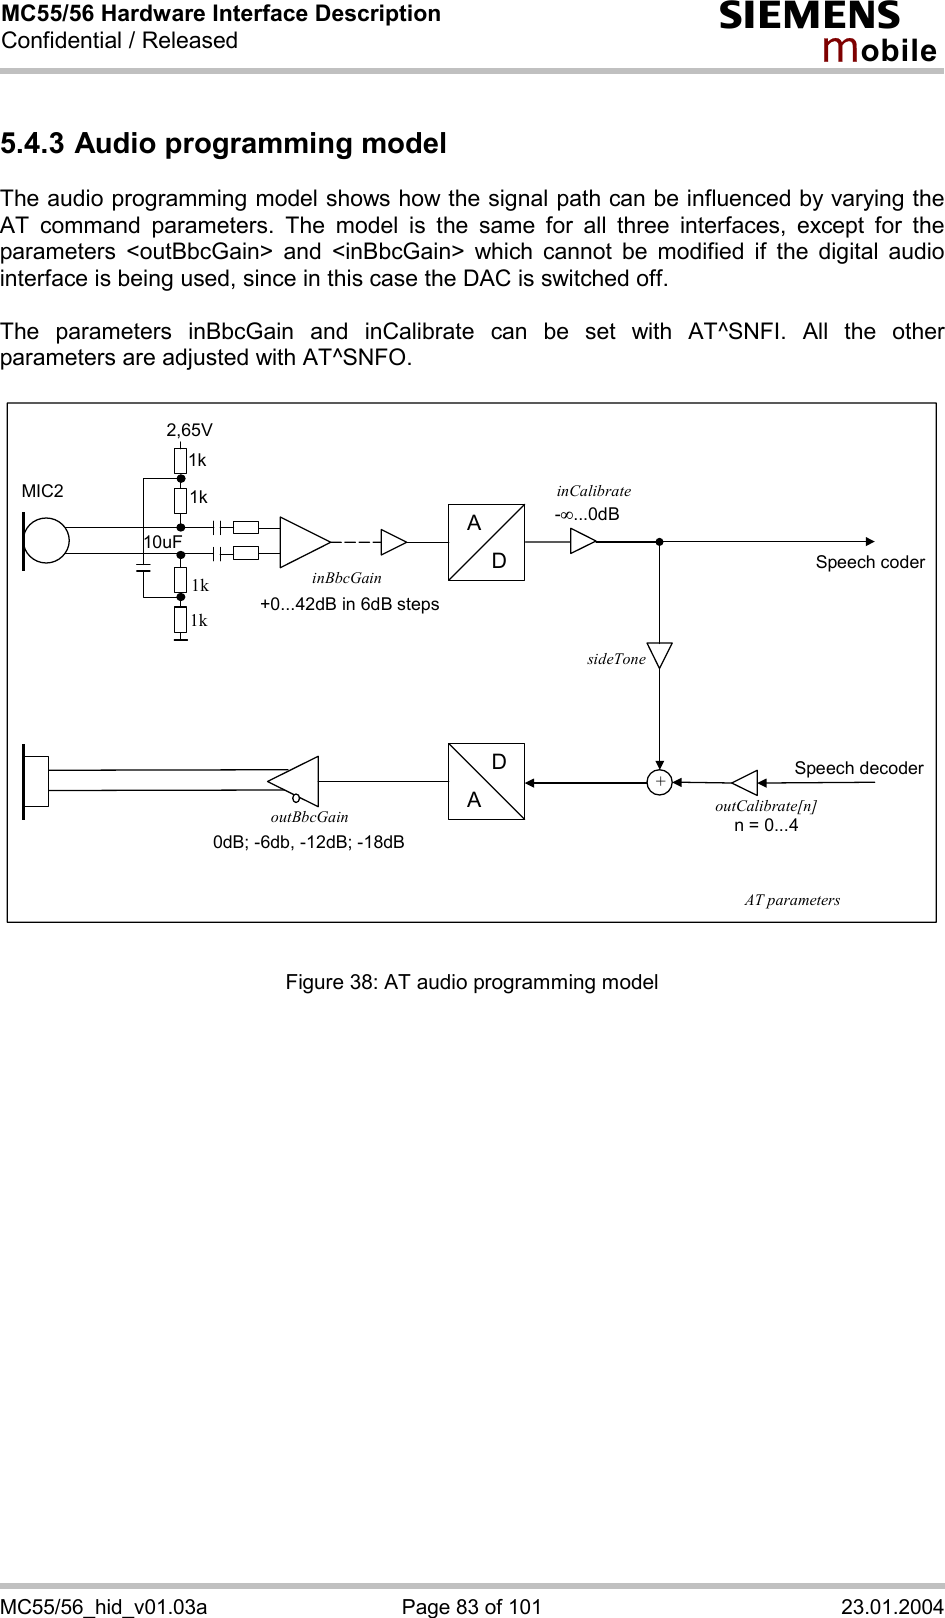 MC55/56 Hardware Interface Description Confidential / Released s mo b i l e MC55/56_hid_v01.03a  Page 83 of 101  23.01.2004 5.4.3 Audio programming model The audio programming model shows how the signal path can be influenced by varying the AT command parameters. The model is the same for all three interfaces, except for the parameters &lt;outBbcGain&gt; and &lt;inBbcGain&gt; which cannot be modified if the digital audio interface is being used, since in this case the DAC is switched off.  The parameters inBbcGain and inCalibrate can be set with AT^SNFI. All the other parameters are adjusted with AT^SNFO.  ADAD-¥...0dBSpeech coder0dB; -6db, -12dB; -18dB +0...42dB in 6dB steps 1k 1k 1k 1k 2,65V 10uF + sideTone AT parameters outCalibrate[n] n = 0...4 inCalibrate inBbcGain outBbcGain Speech decoderMIC2  Figure 38: AT audio programming model 